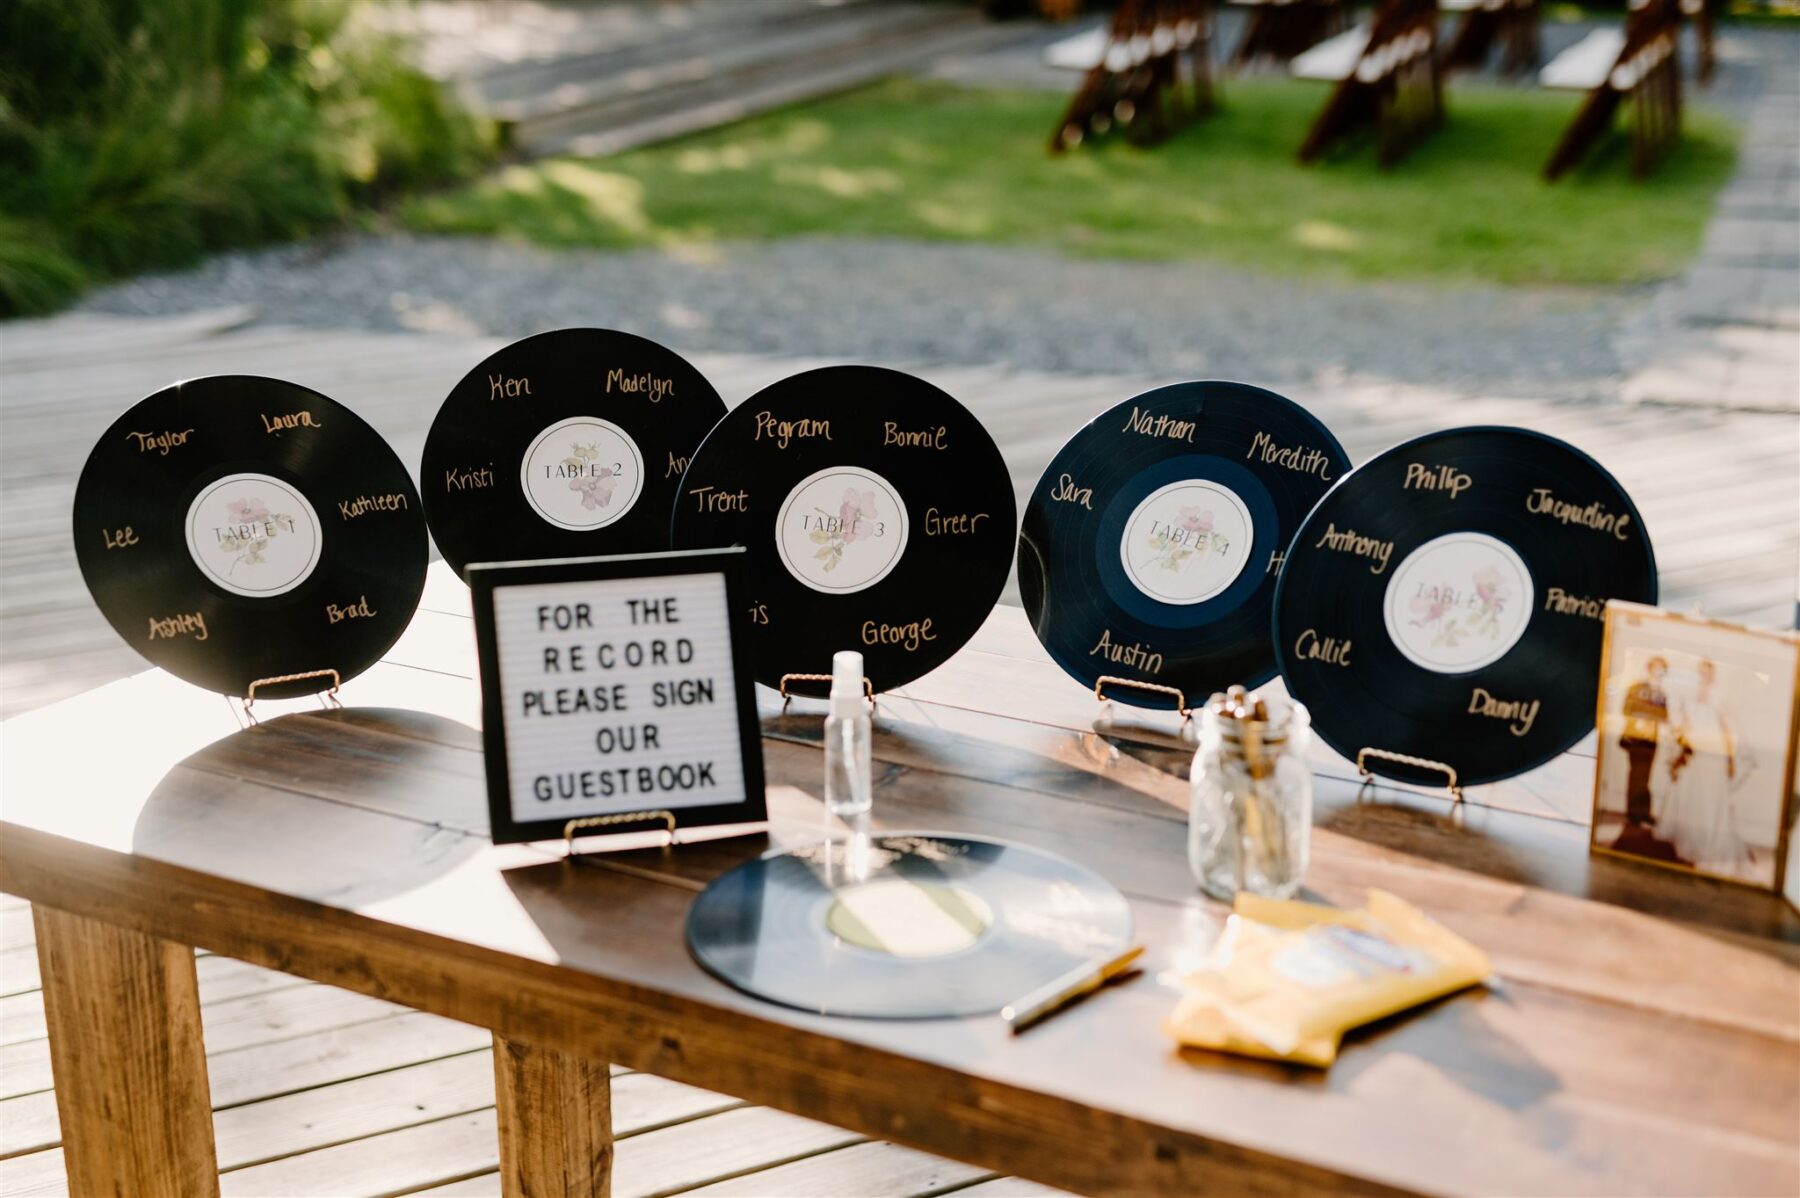 Casual Cool Wedding at The Reserve from Sara Bill Photography